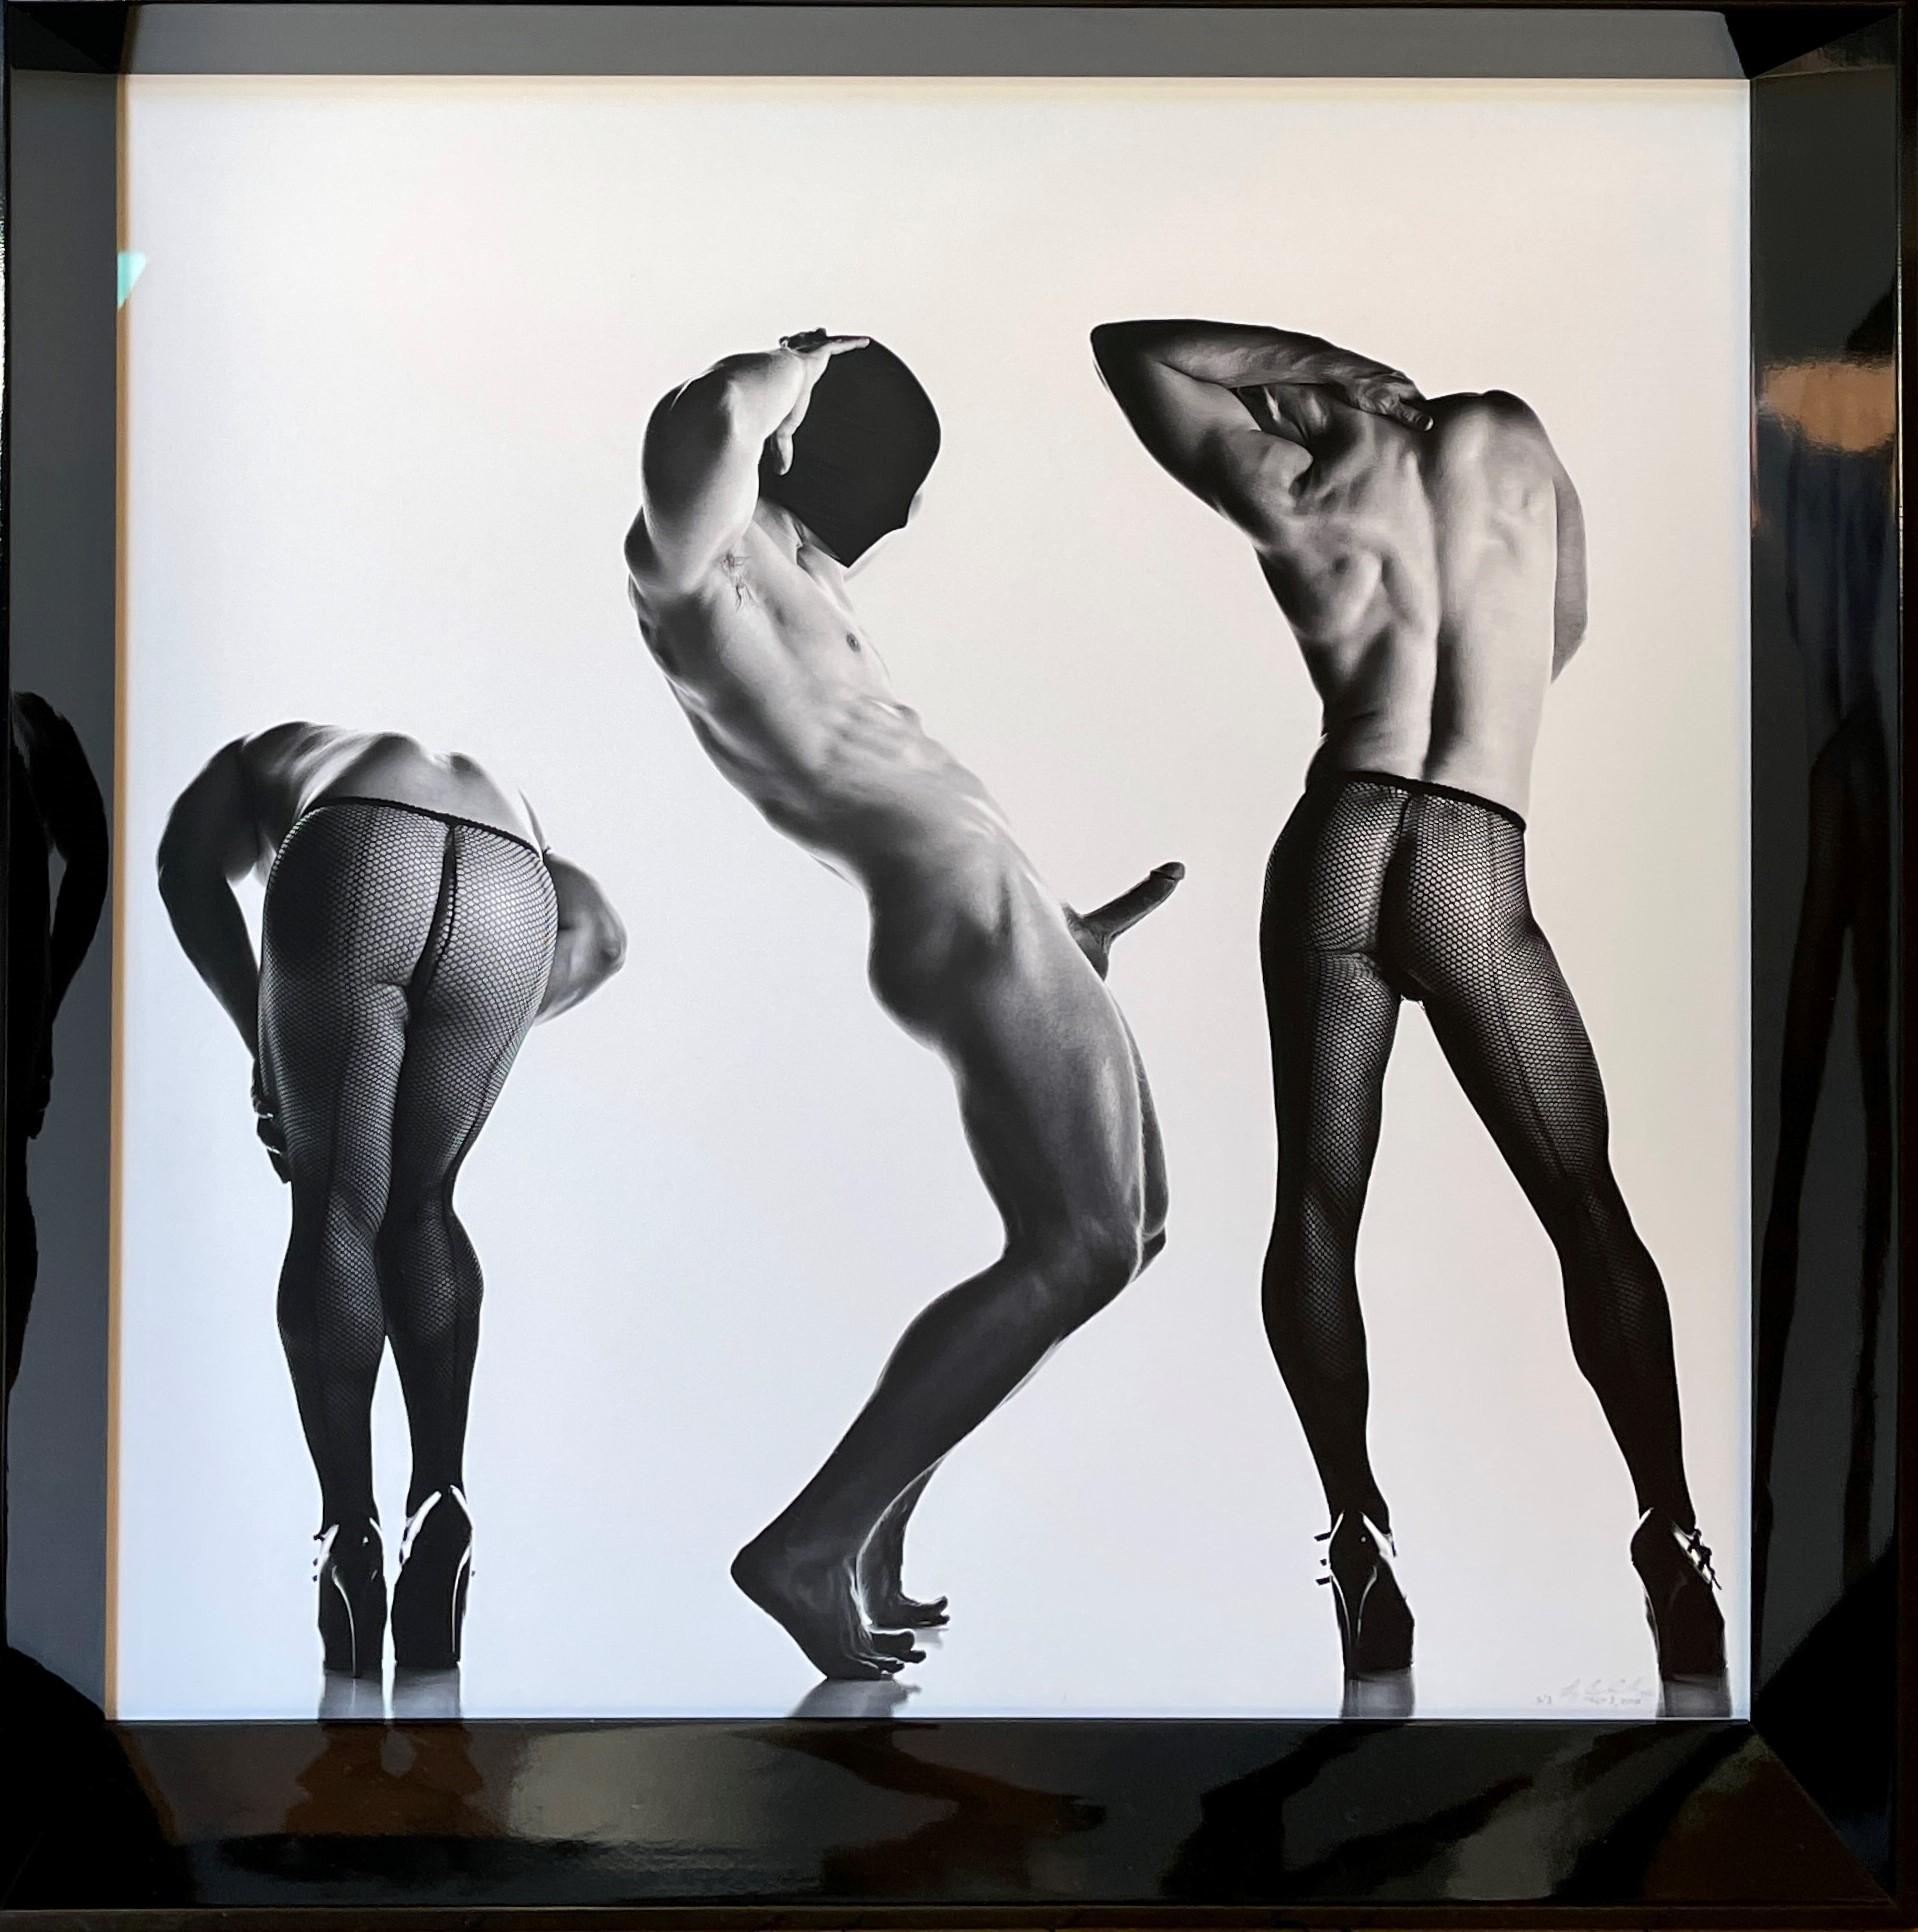 Sex 3 - Erotic Male Photo, Fishnet Stockings and High Heals, Framed - Photograph by Doug Birkenheuer